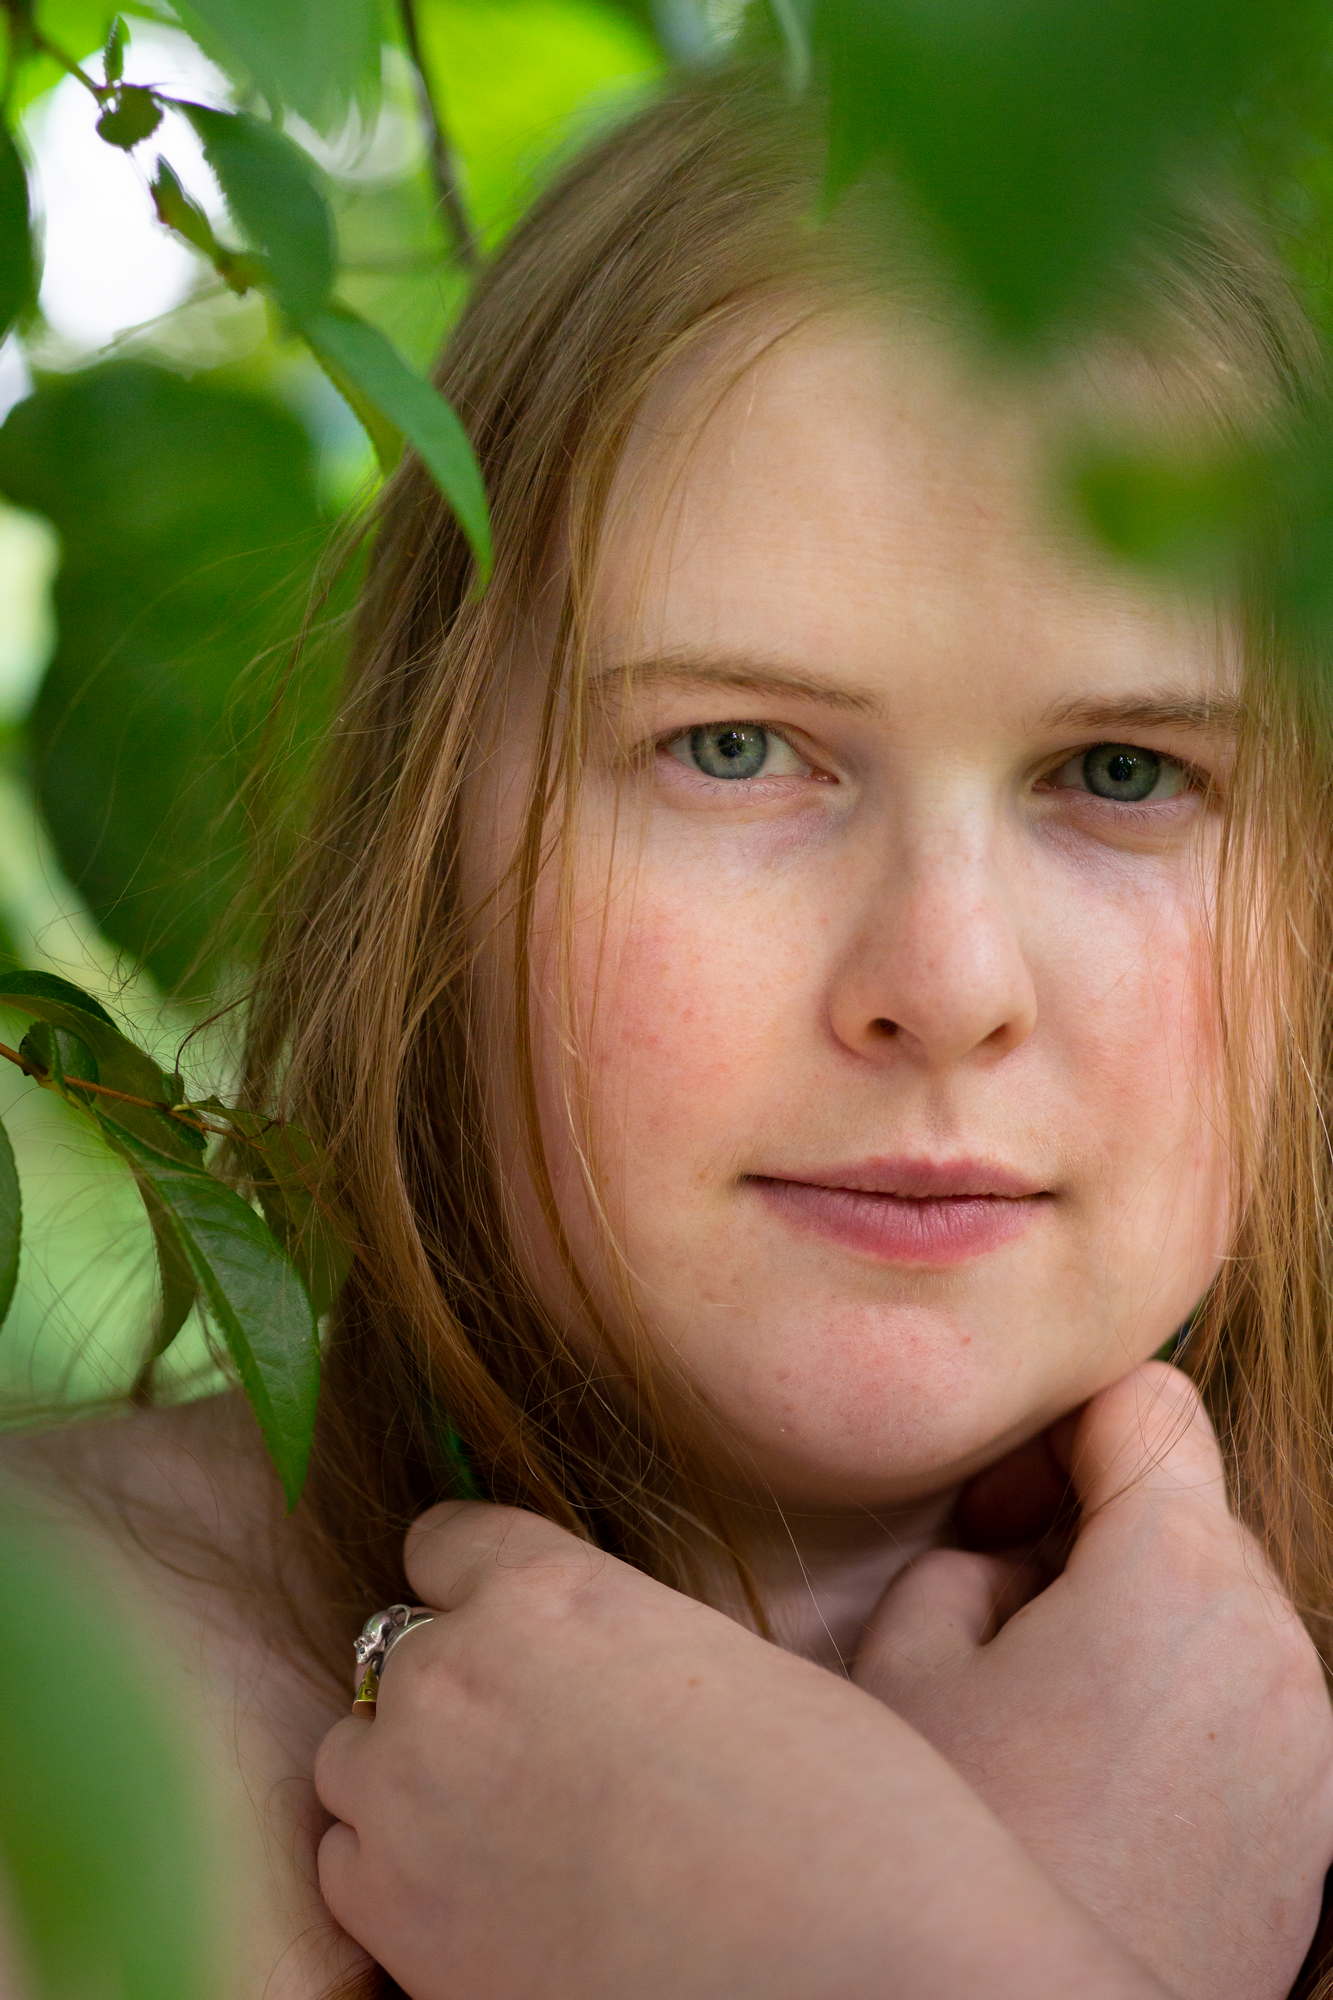 A fat person looks at the camera among leaves for a headshot